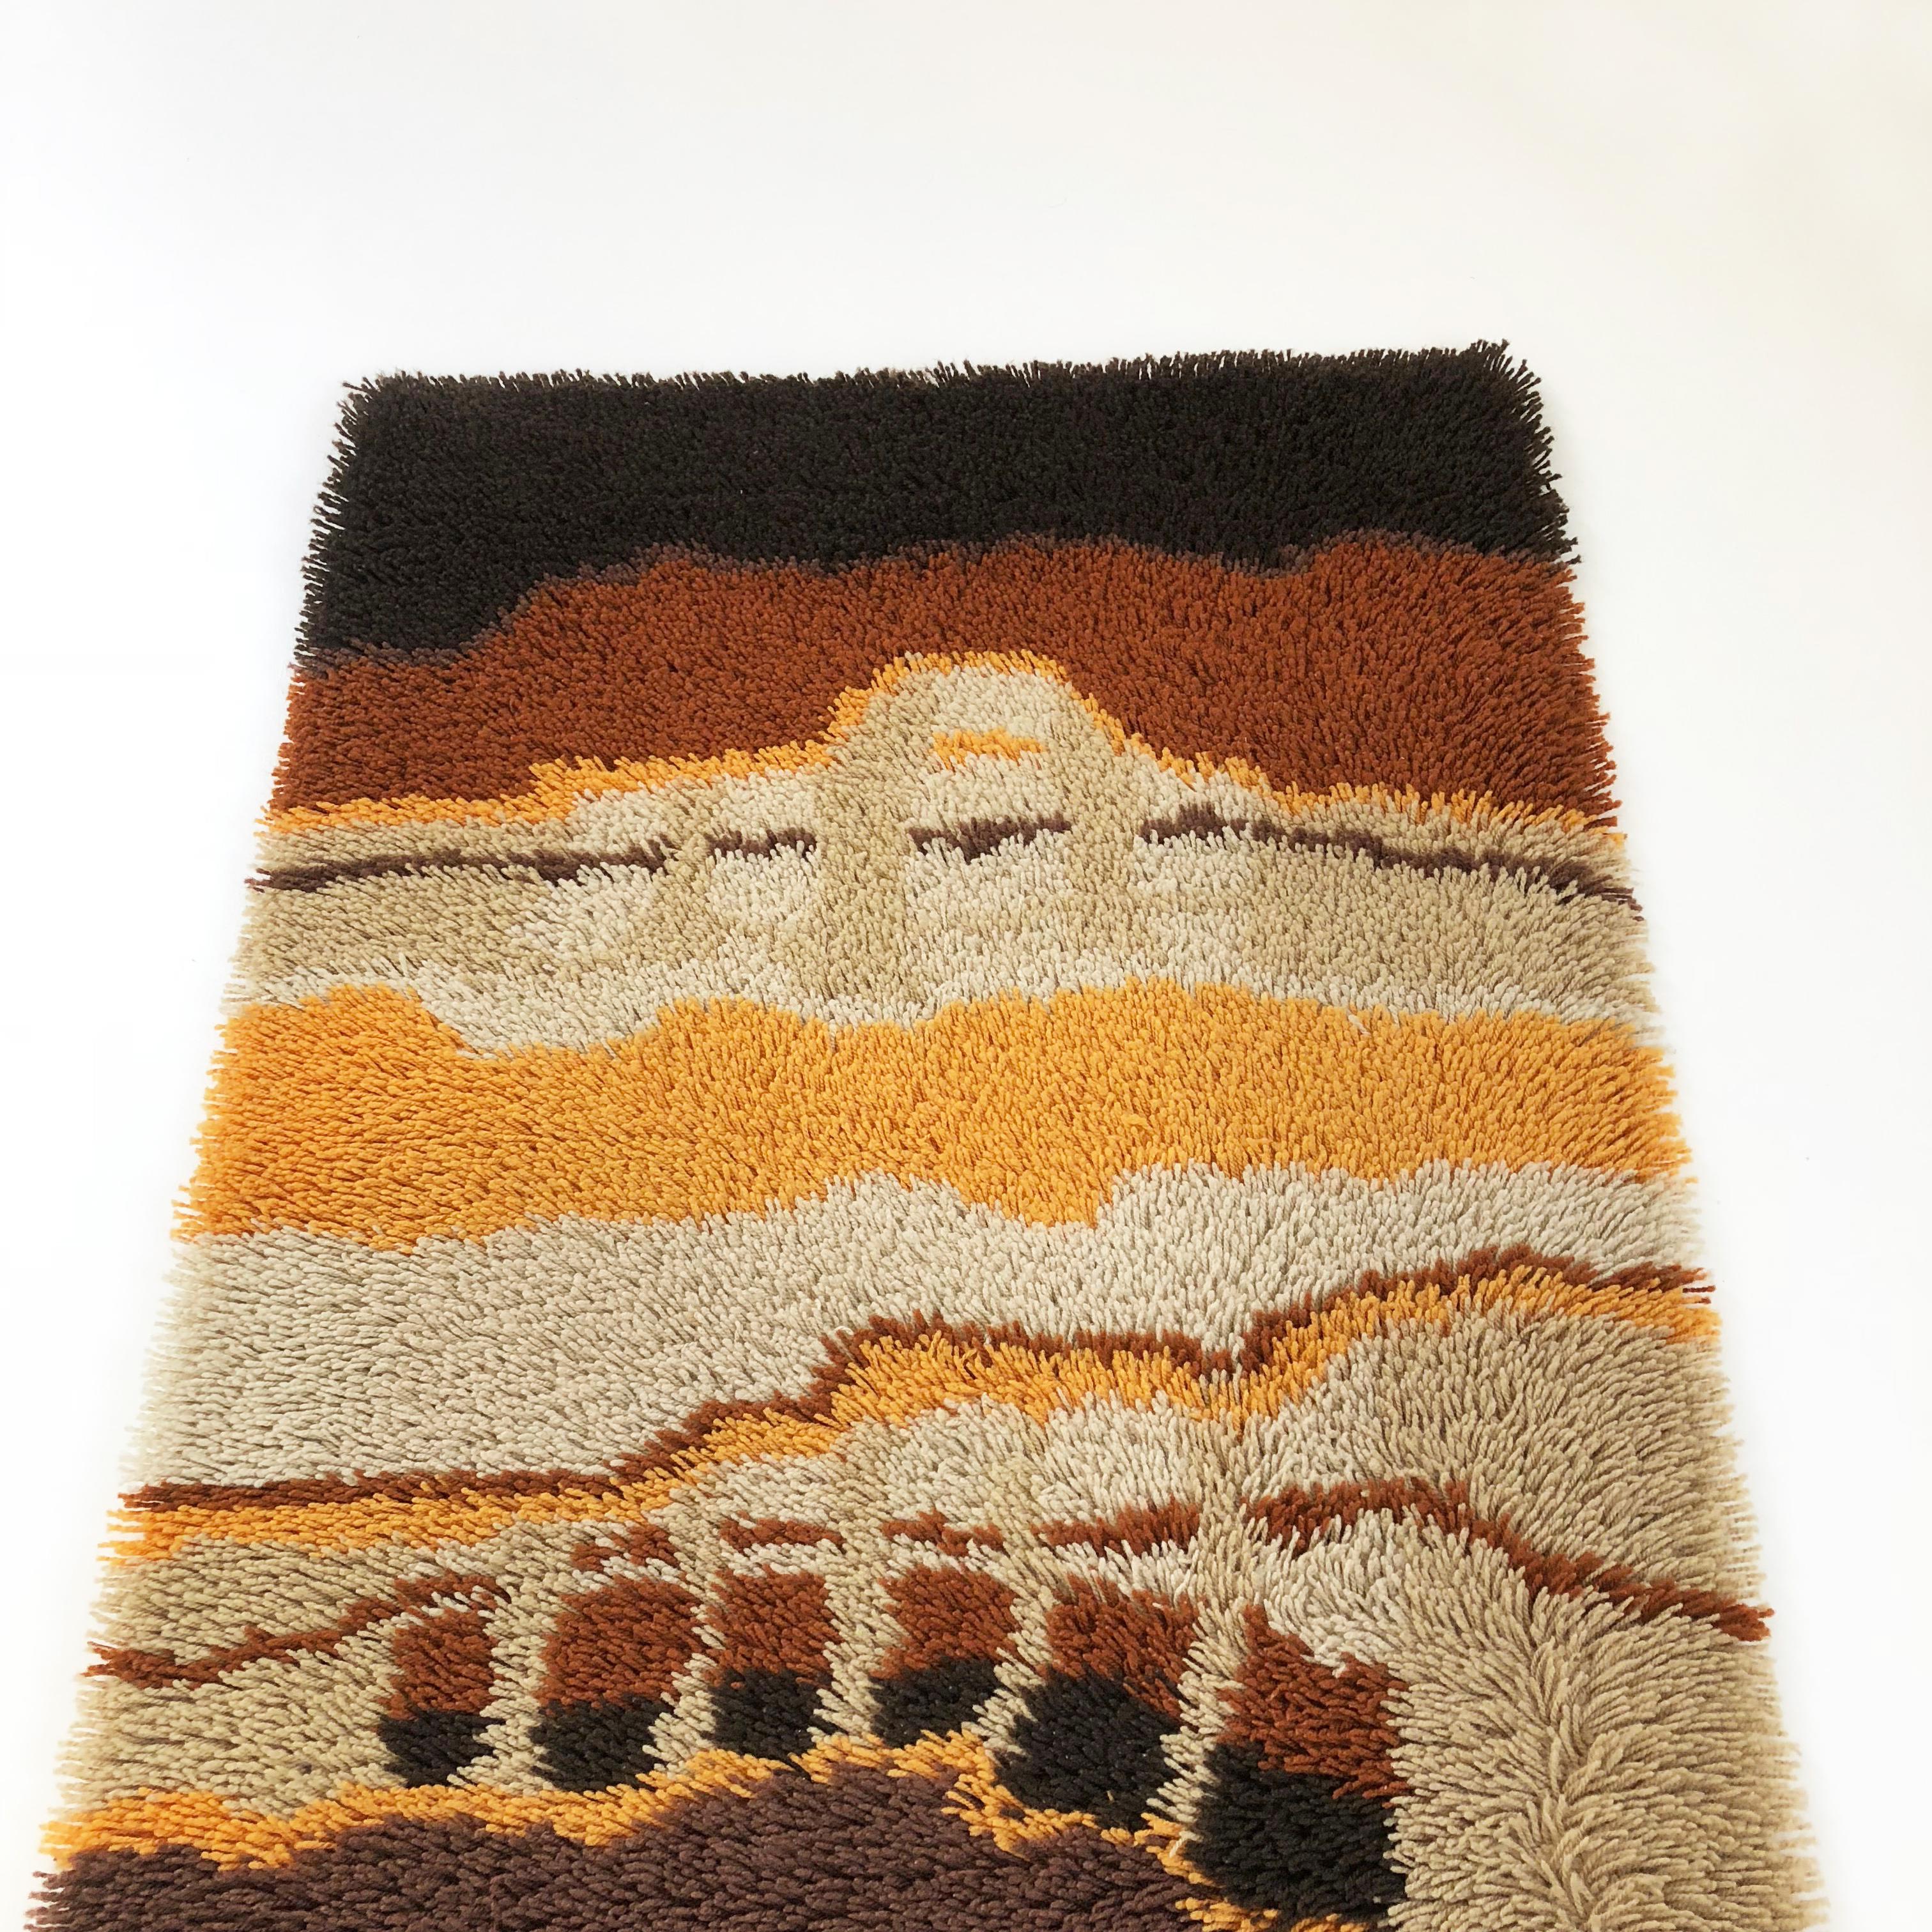 Small 1970s Modernist Multi-Color High Pile Rya Rug by Desso, Netherlands No. 2 1